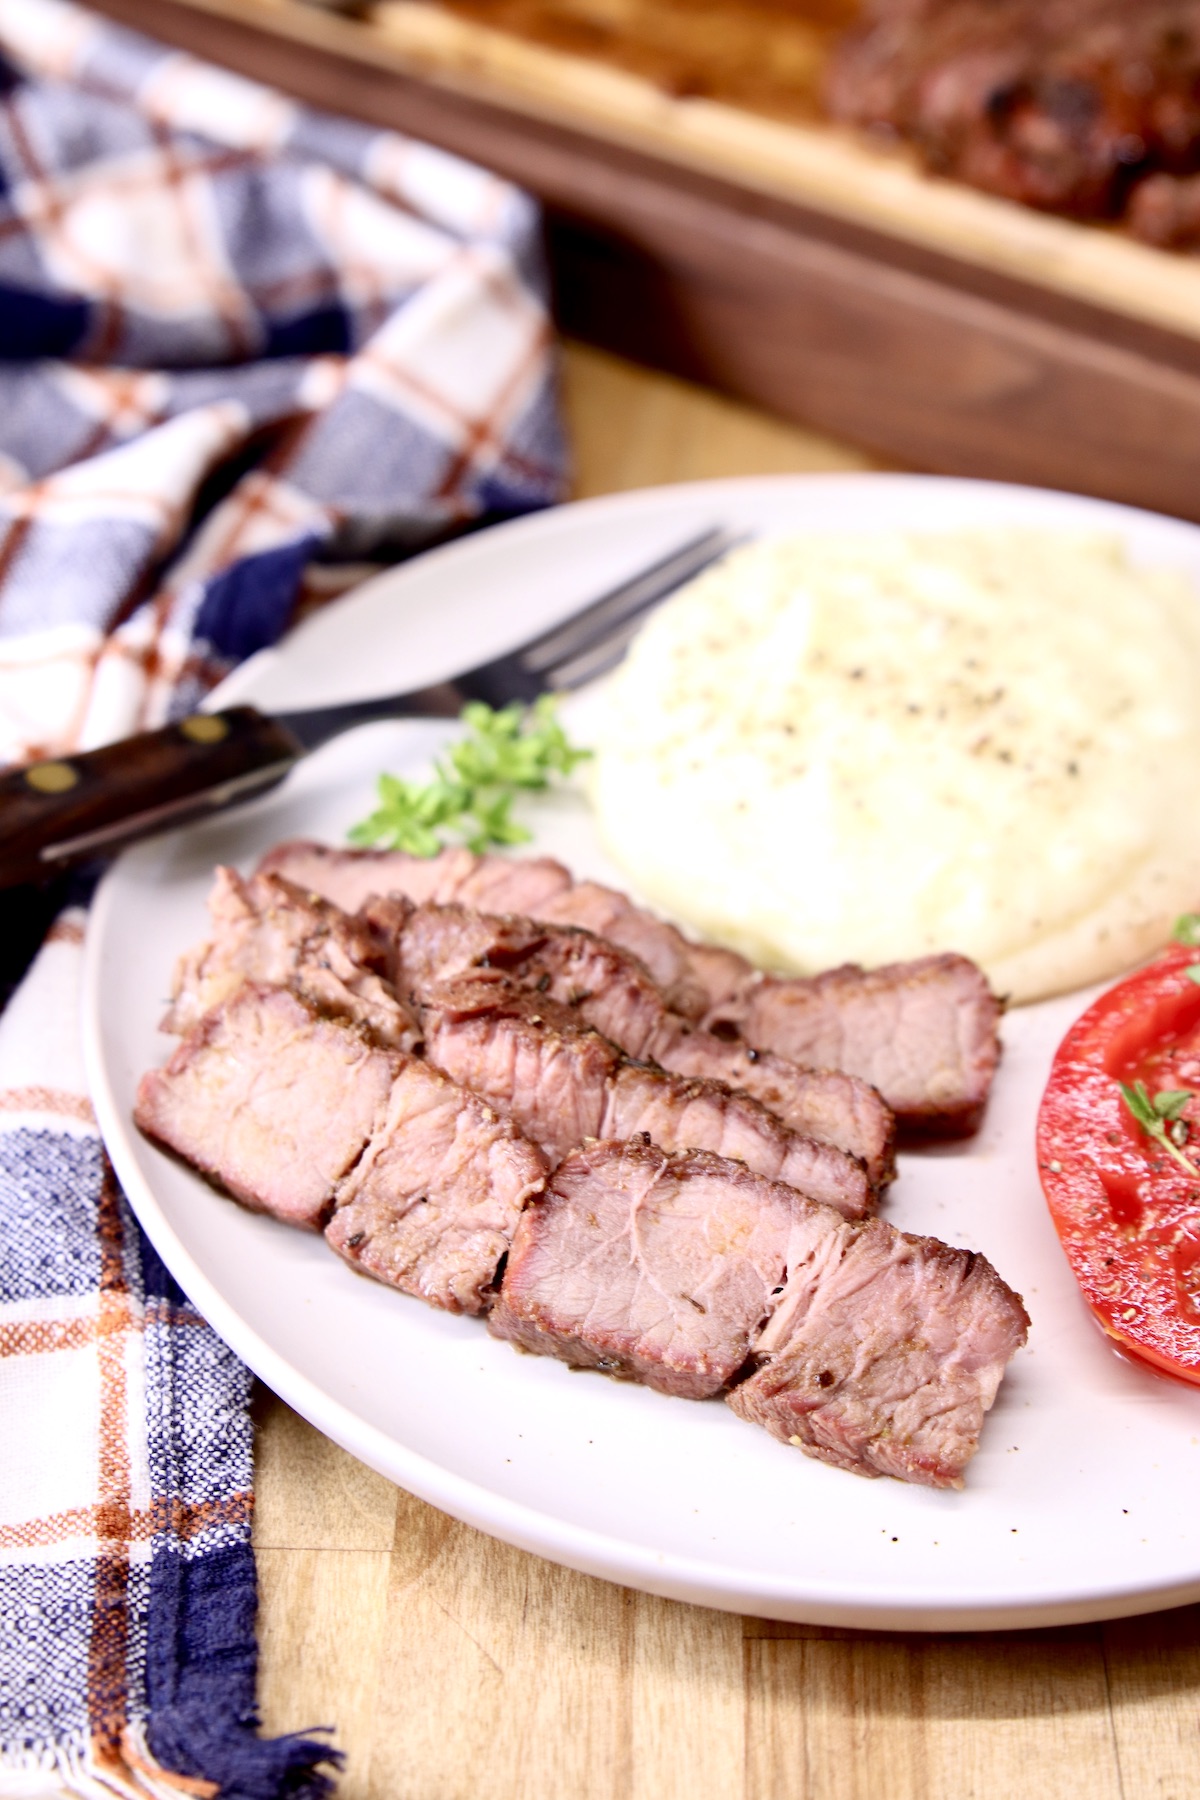 Grilled beef slices on a plate with mashed potatoes